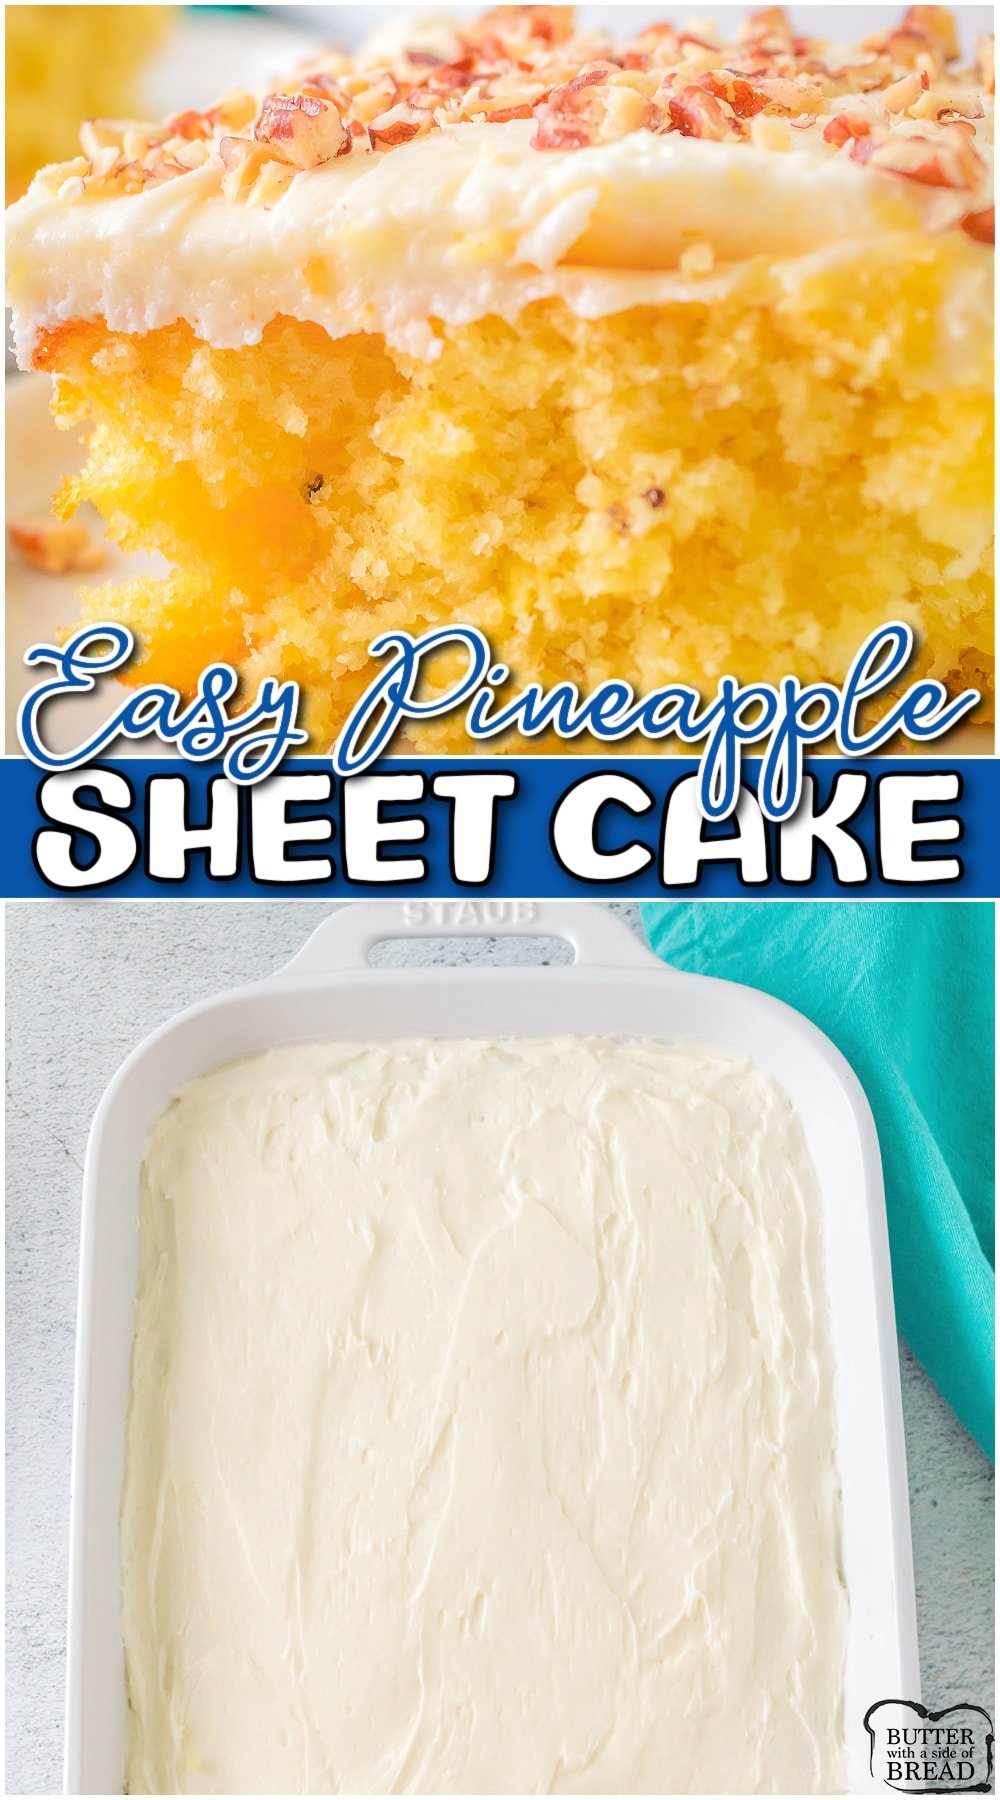 Pineapple Sheet Cake is a delightful tropical dessert that is perfect for pineapple lovers! This sheet cake is made with cake mix, pineapple, pudding mix & is topped with delicious cream cheese frosting. 